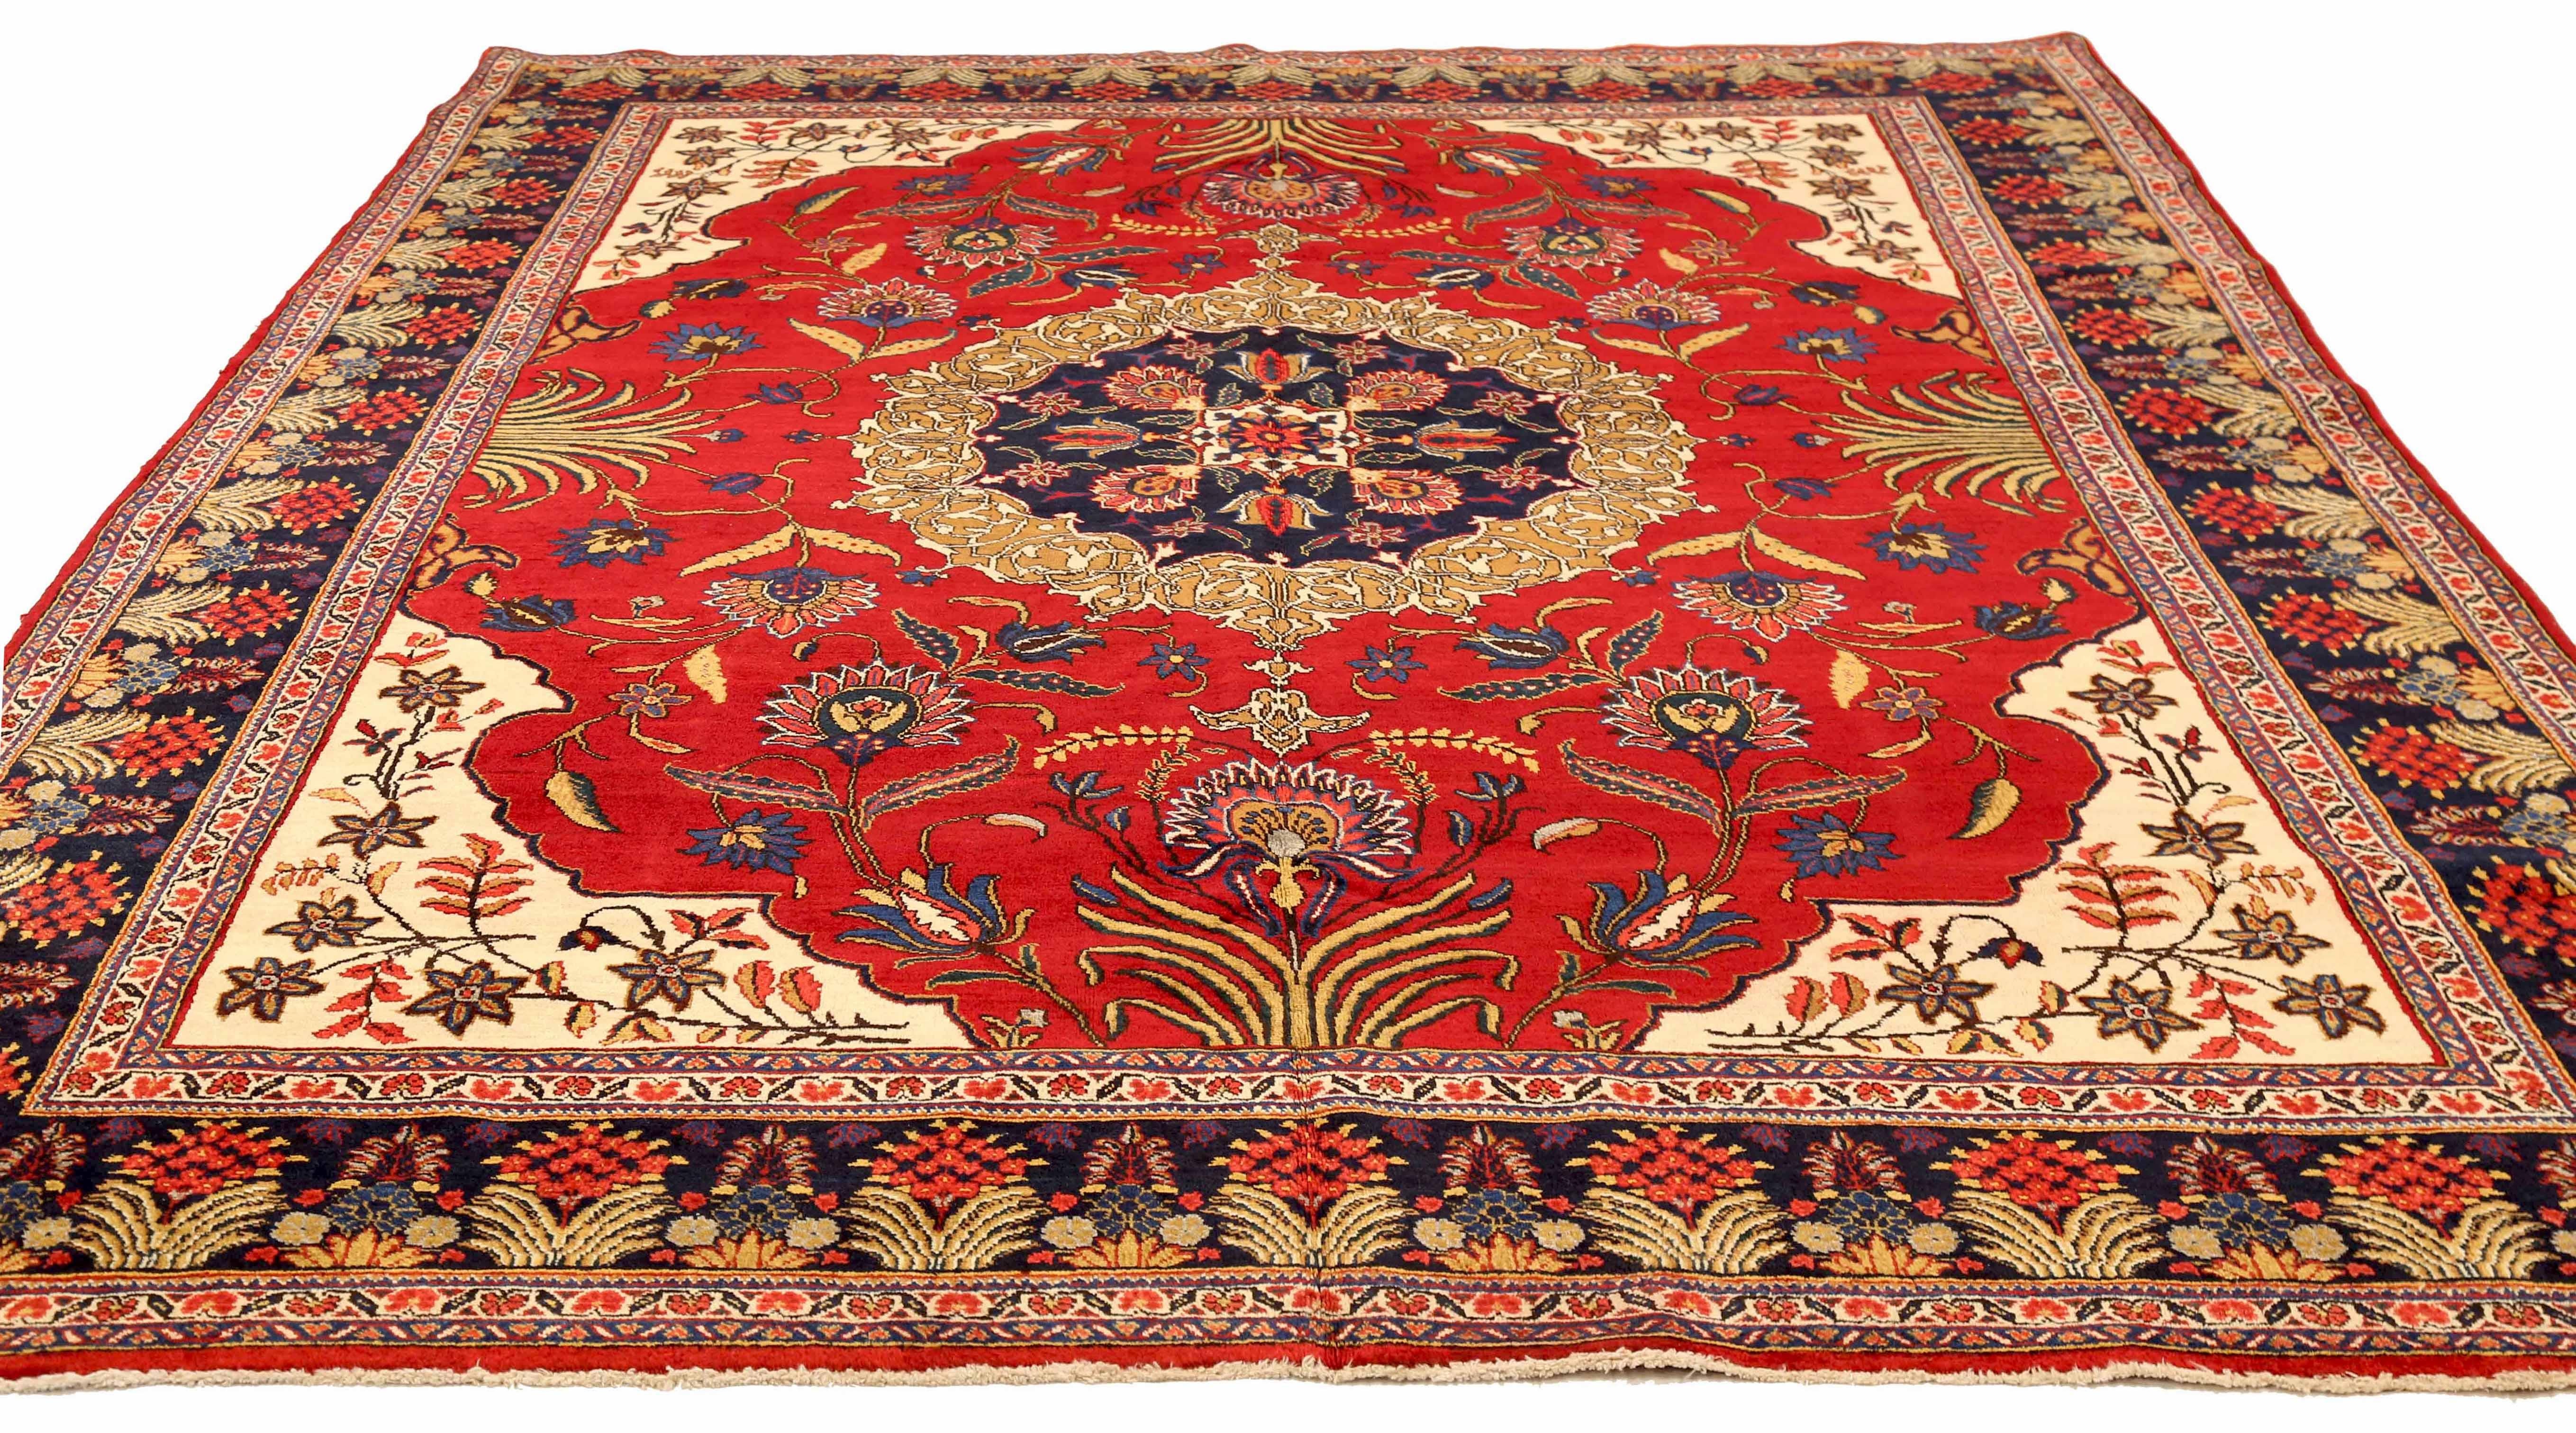 Antique Persian area rug handwoven from the finest sheep’s wool. It’s colored with all-natural vegetable dyes that are safe for humans and pets. It’s a traditional Ardabil design handwoven by expert artisans. It’s a lovely area rug that can be